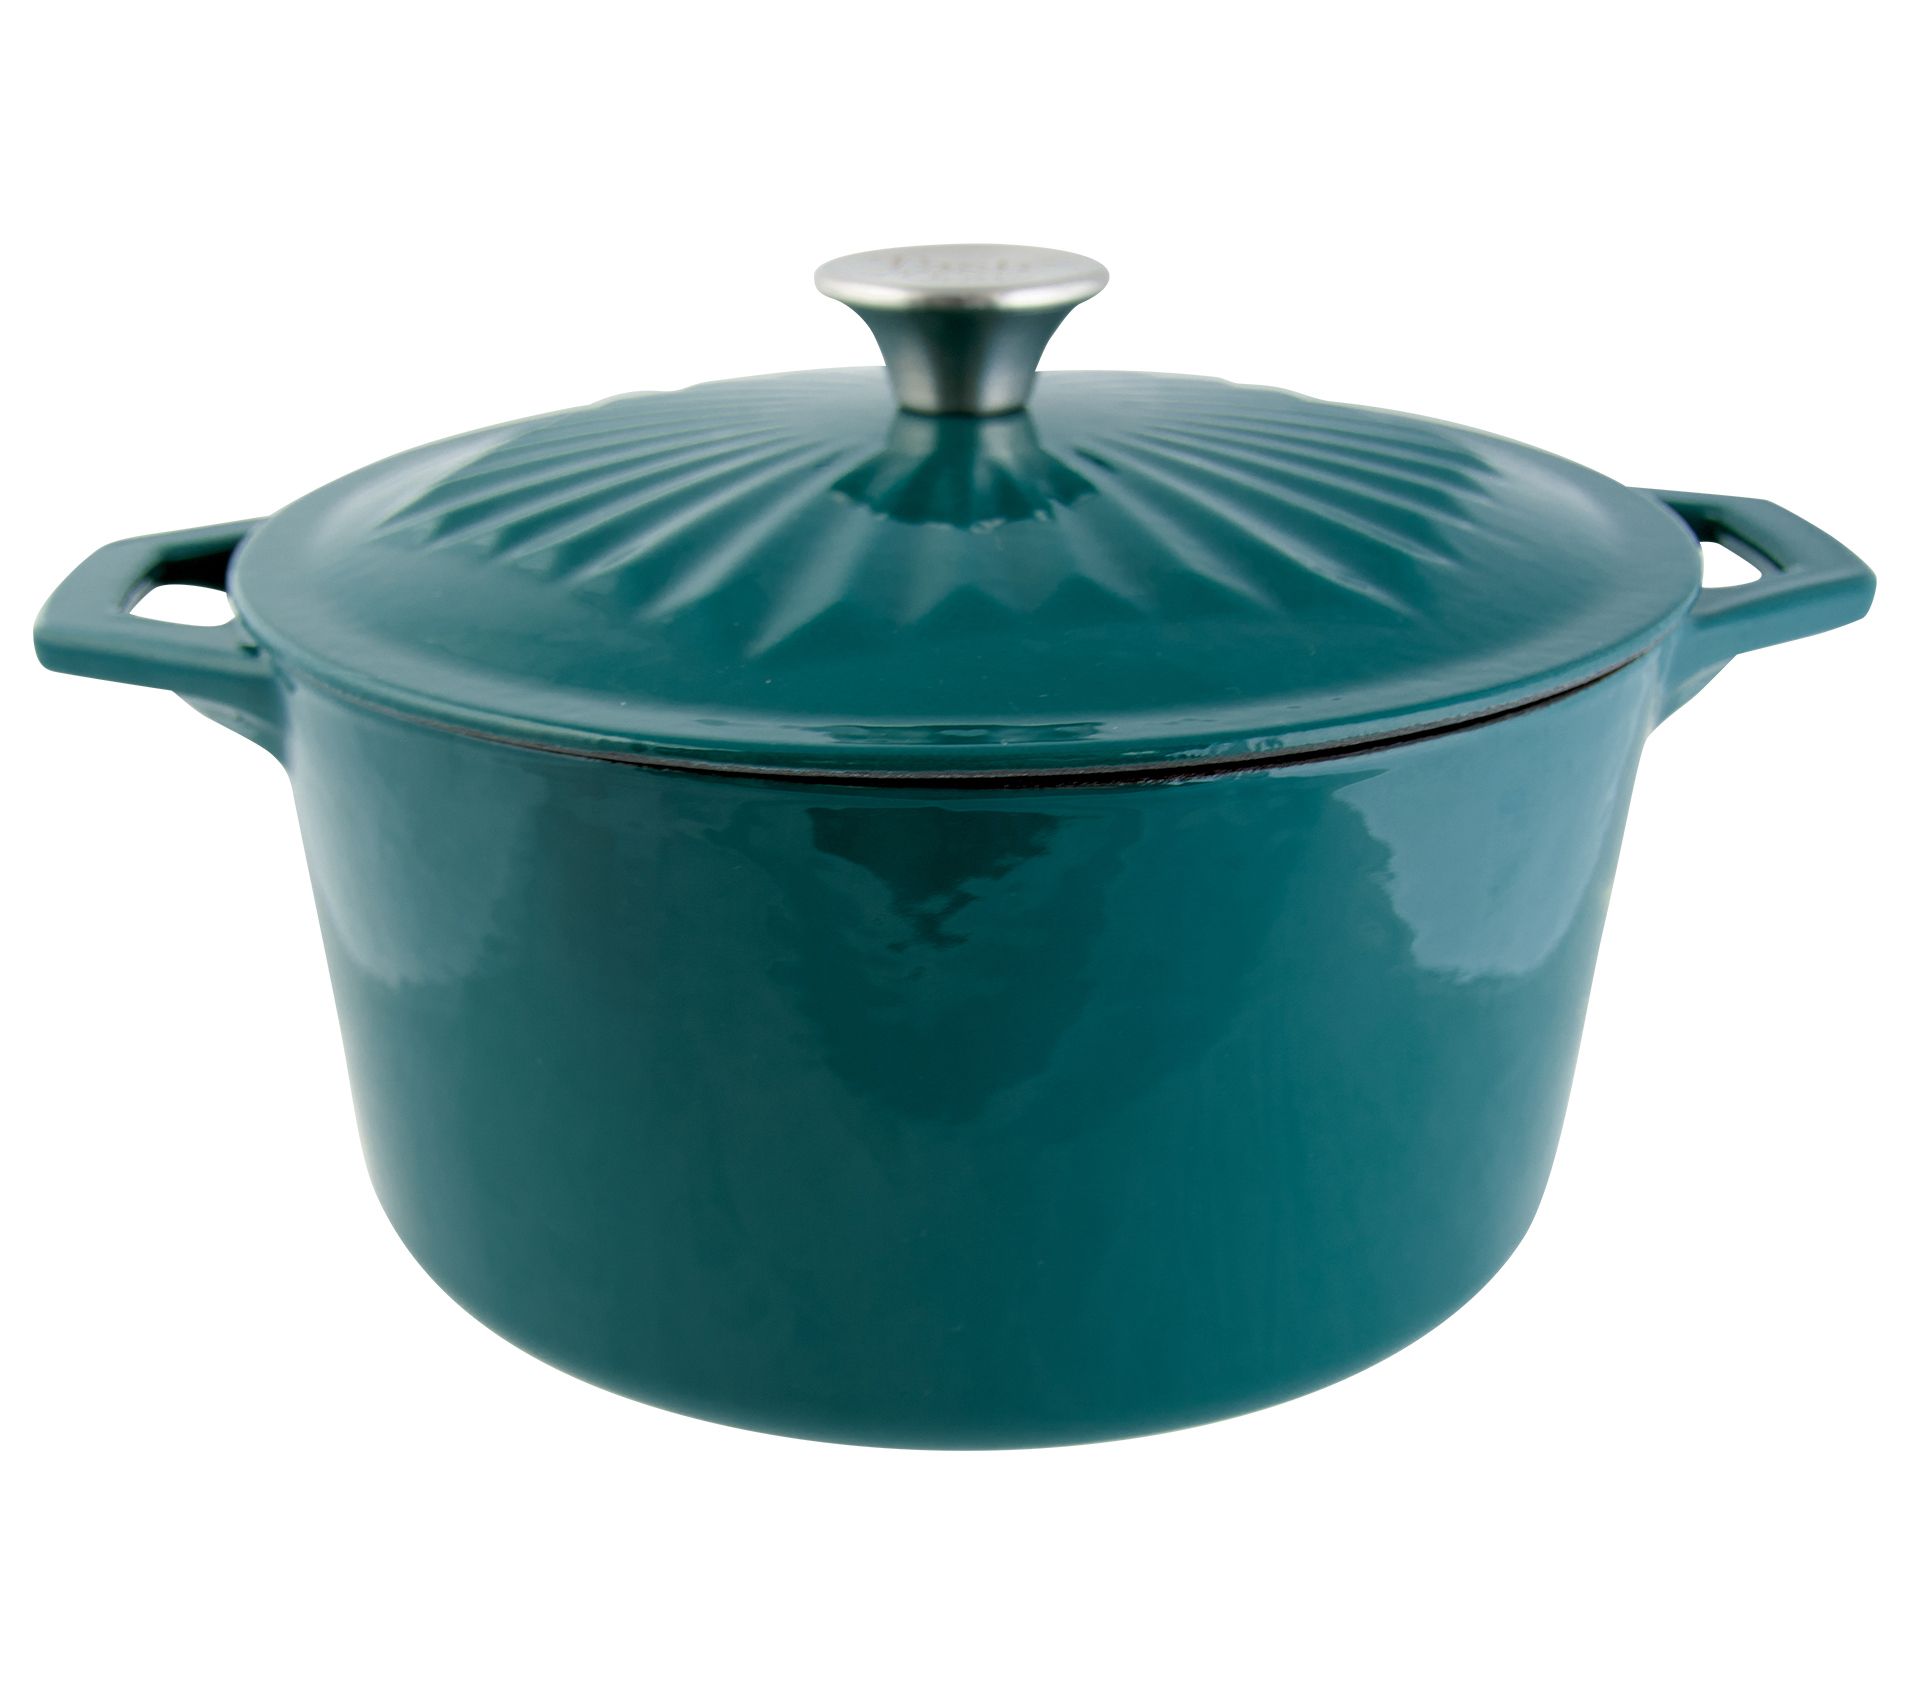 Taste of Home 7-Quart Enameled Cast Iron Dutch Oven with Grill Lid